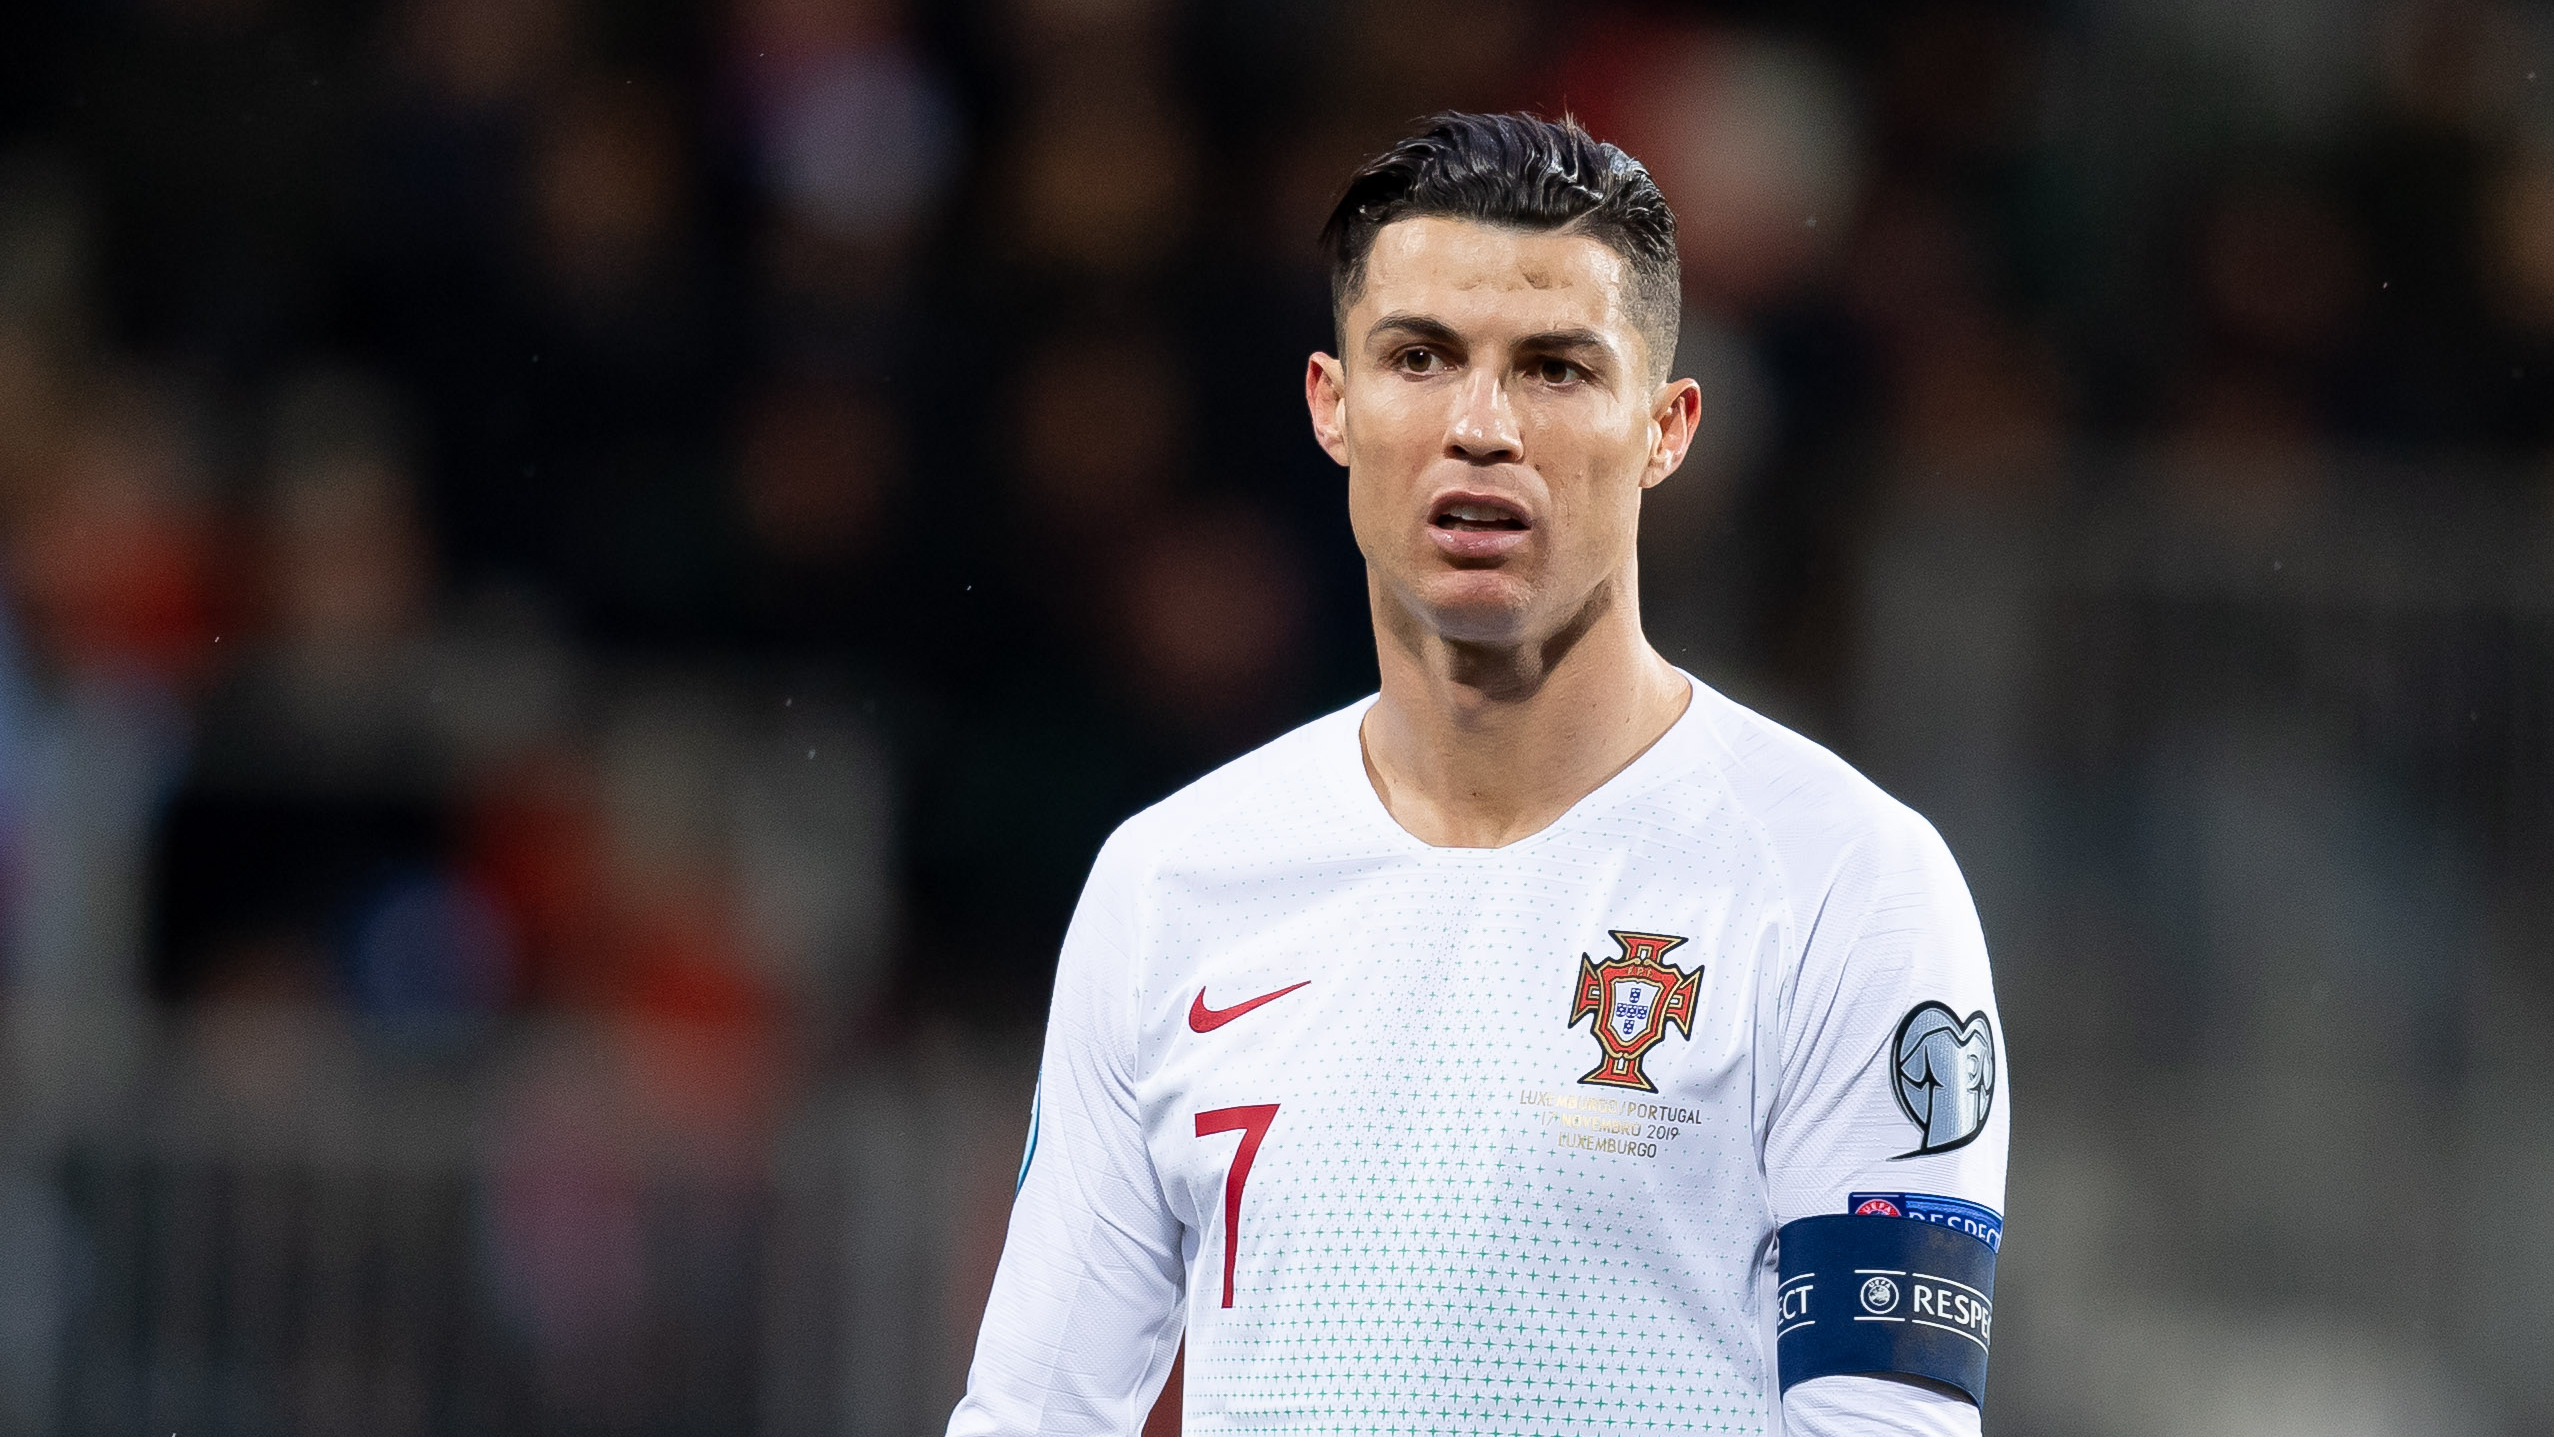 Ronaldo reprimanded for not wearing a mask while watching Portugal